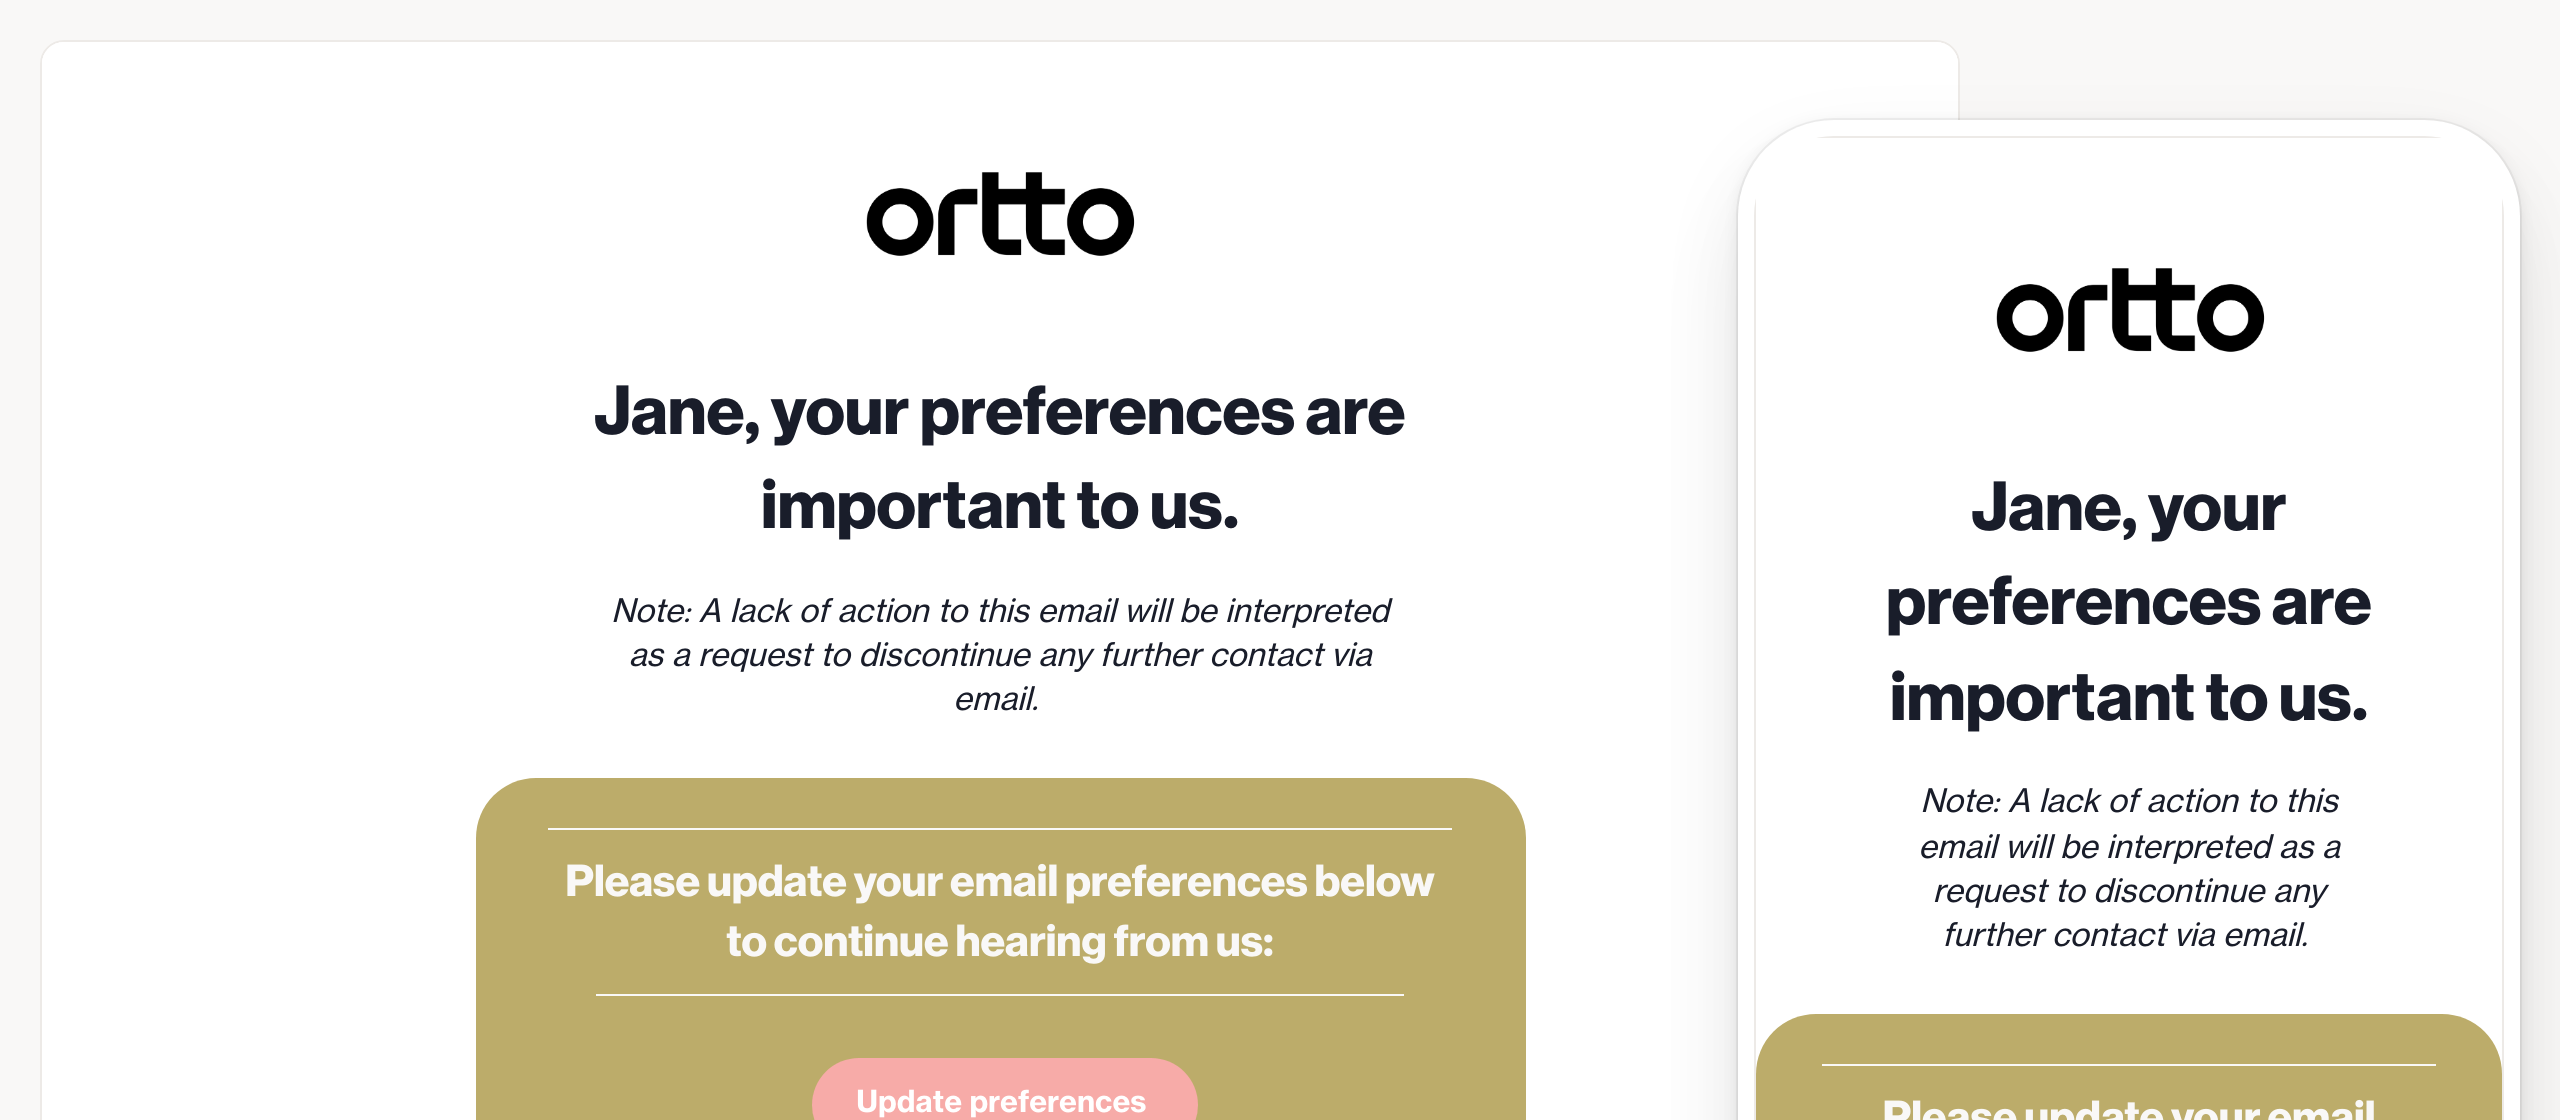 Email preference update